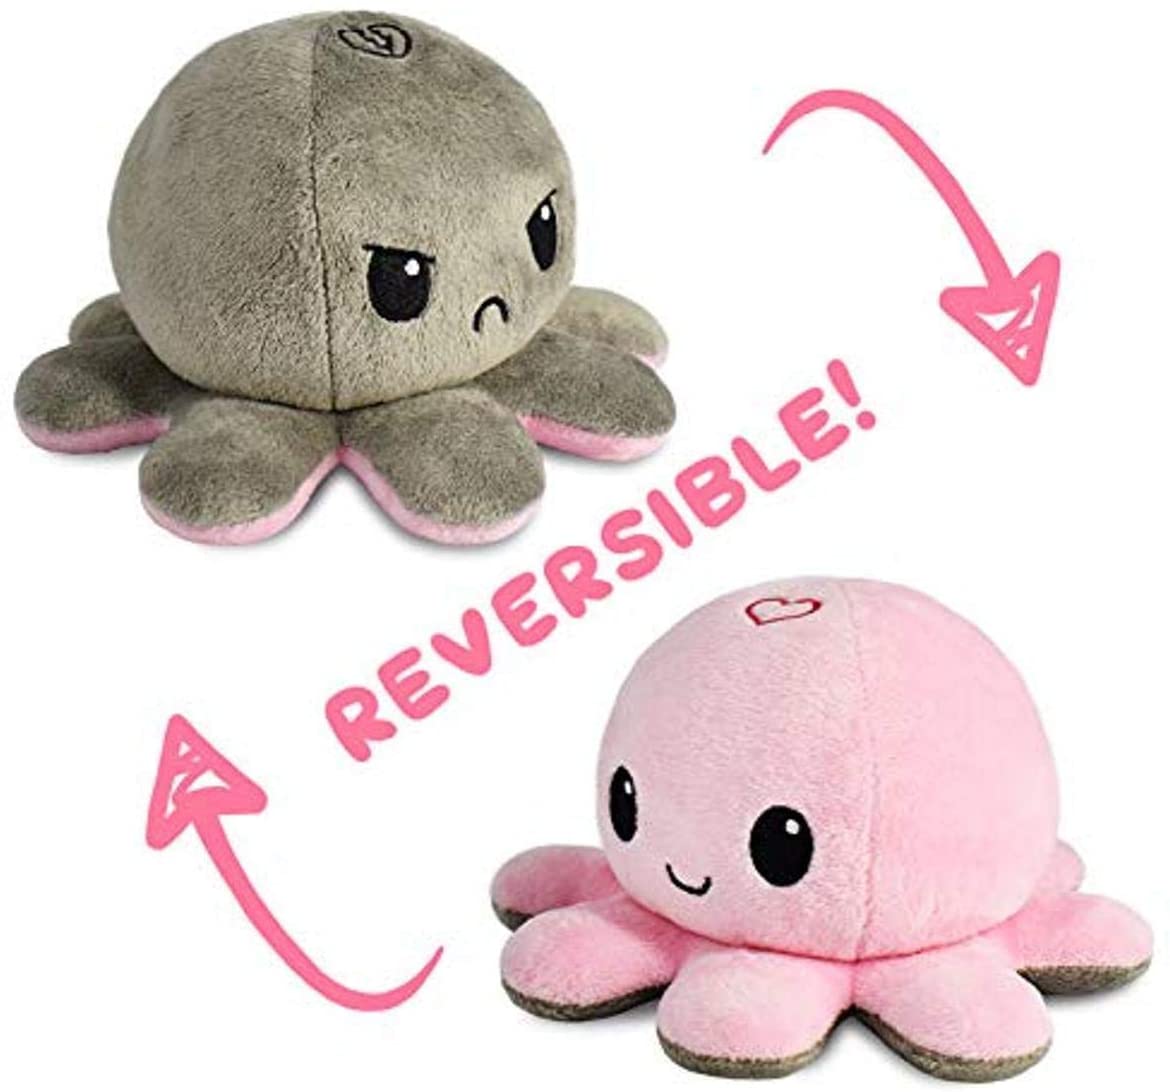 TeeTurtle | The Original Reversible Octopus Plushie | Patented Design | Show your mood without saying a word! $8.95